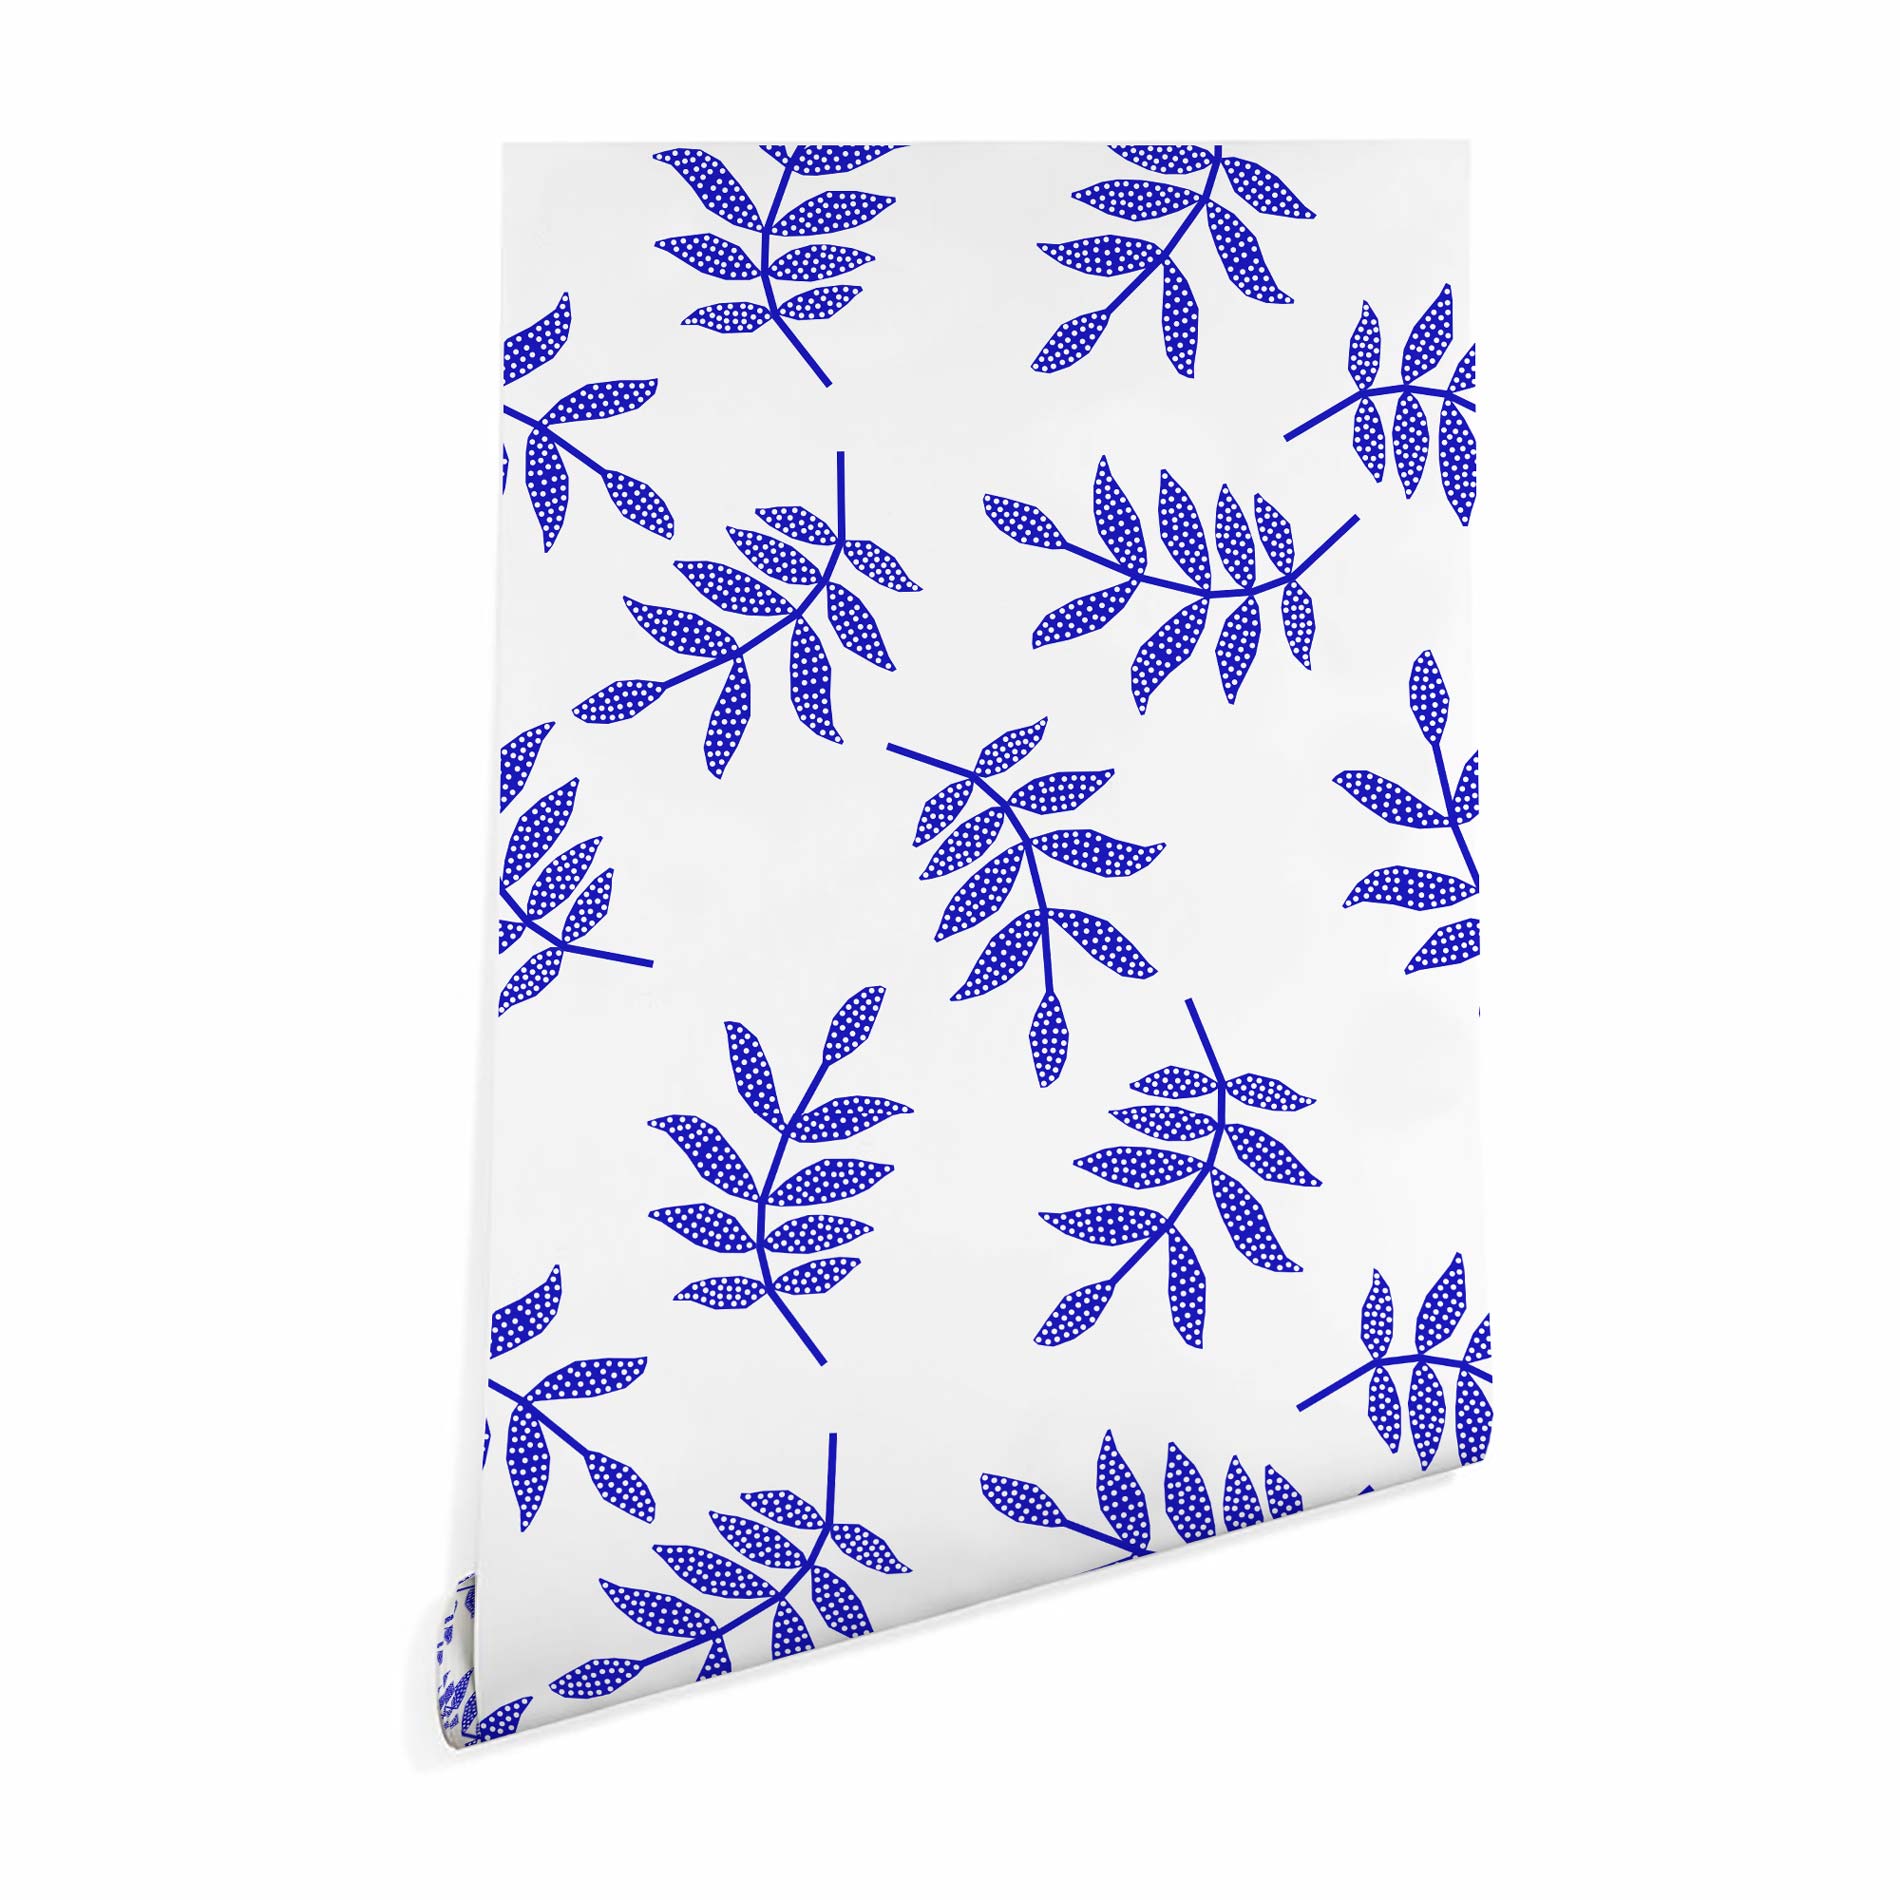 Blue and white leaf pattern wallpaper - Peel and Stick Removable